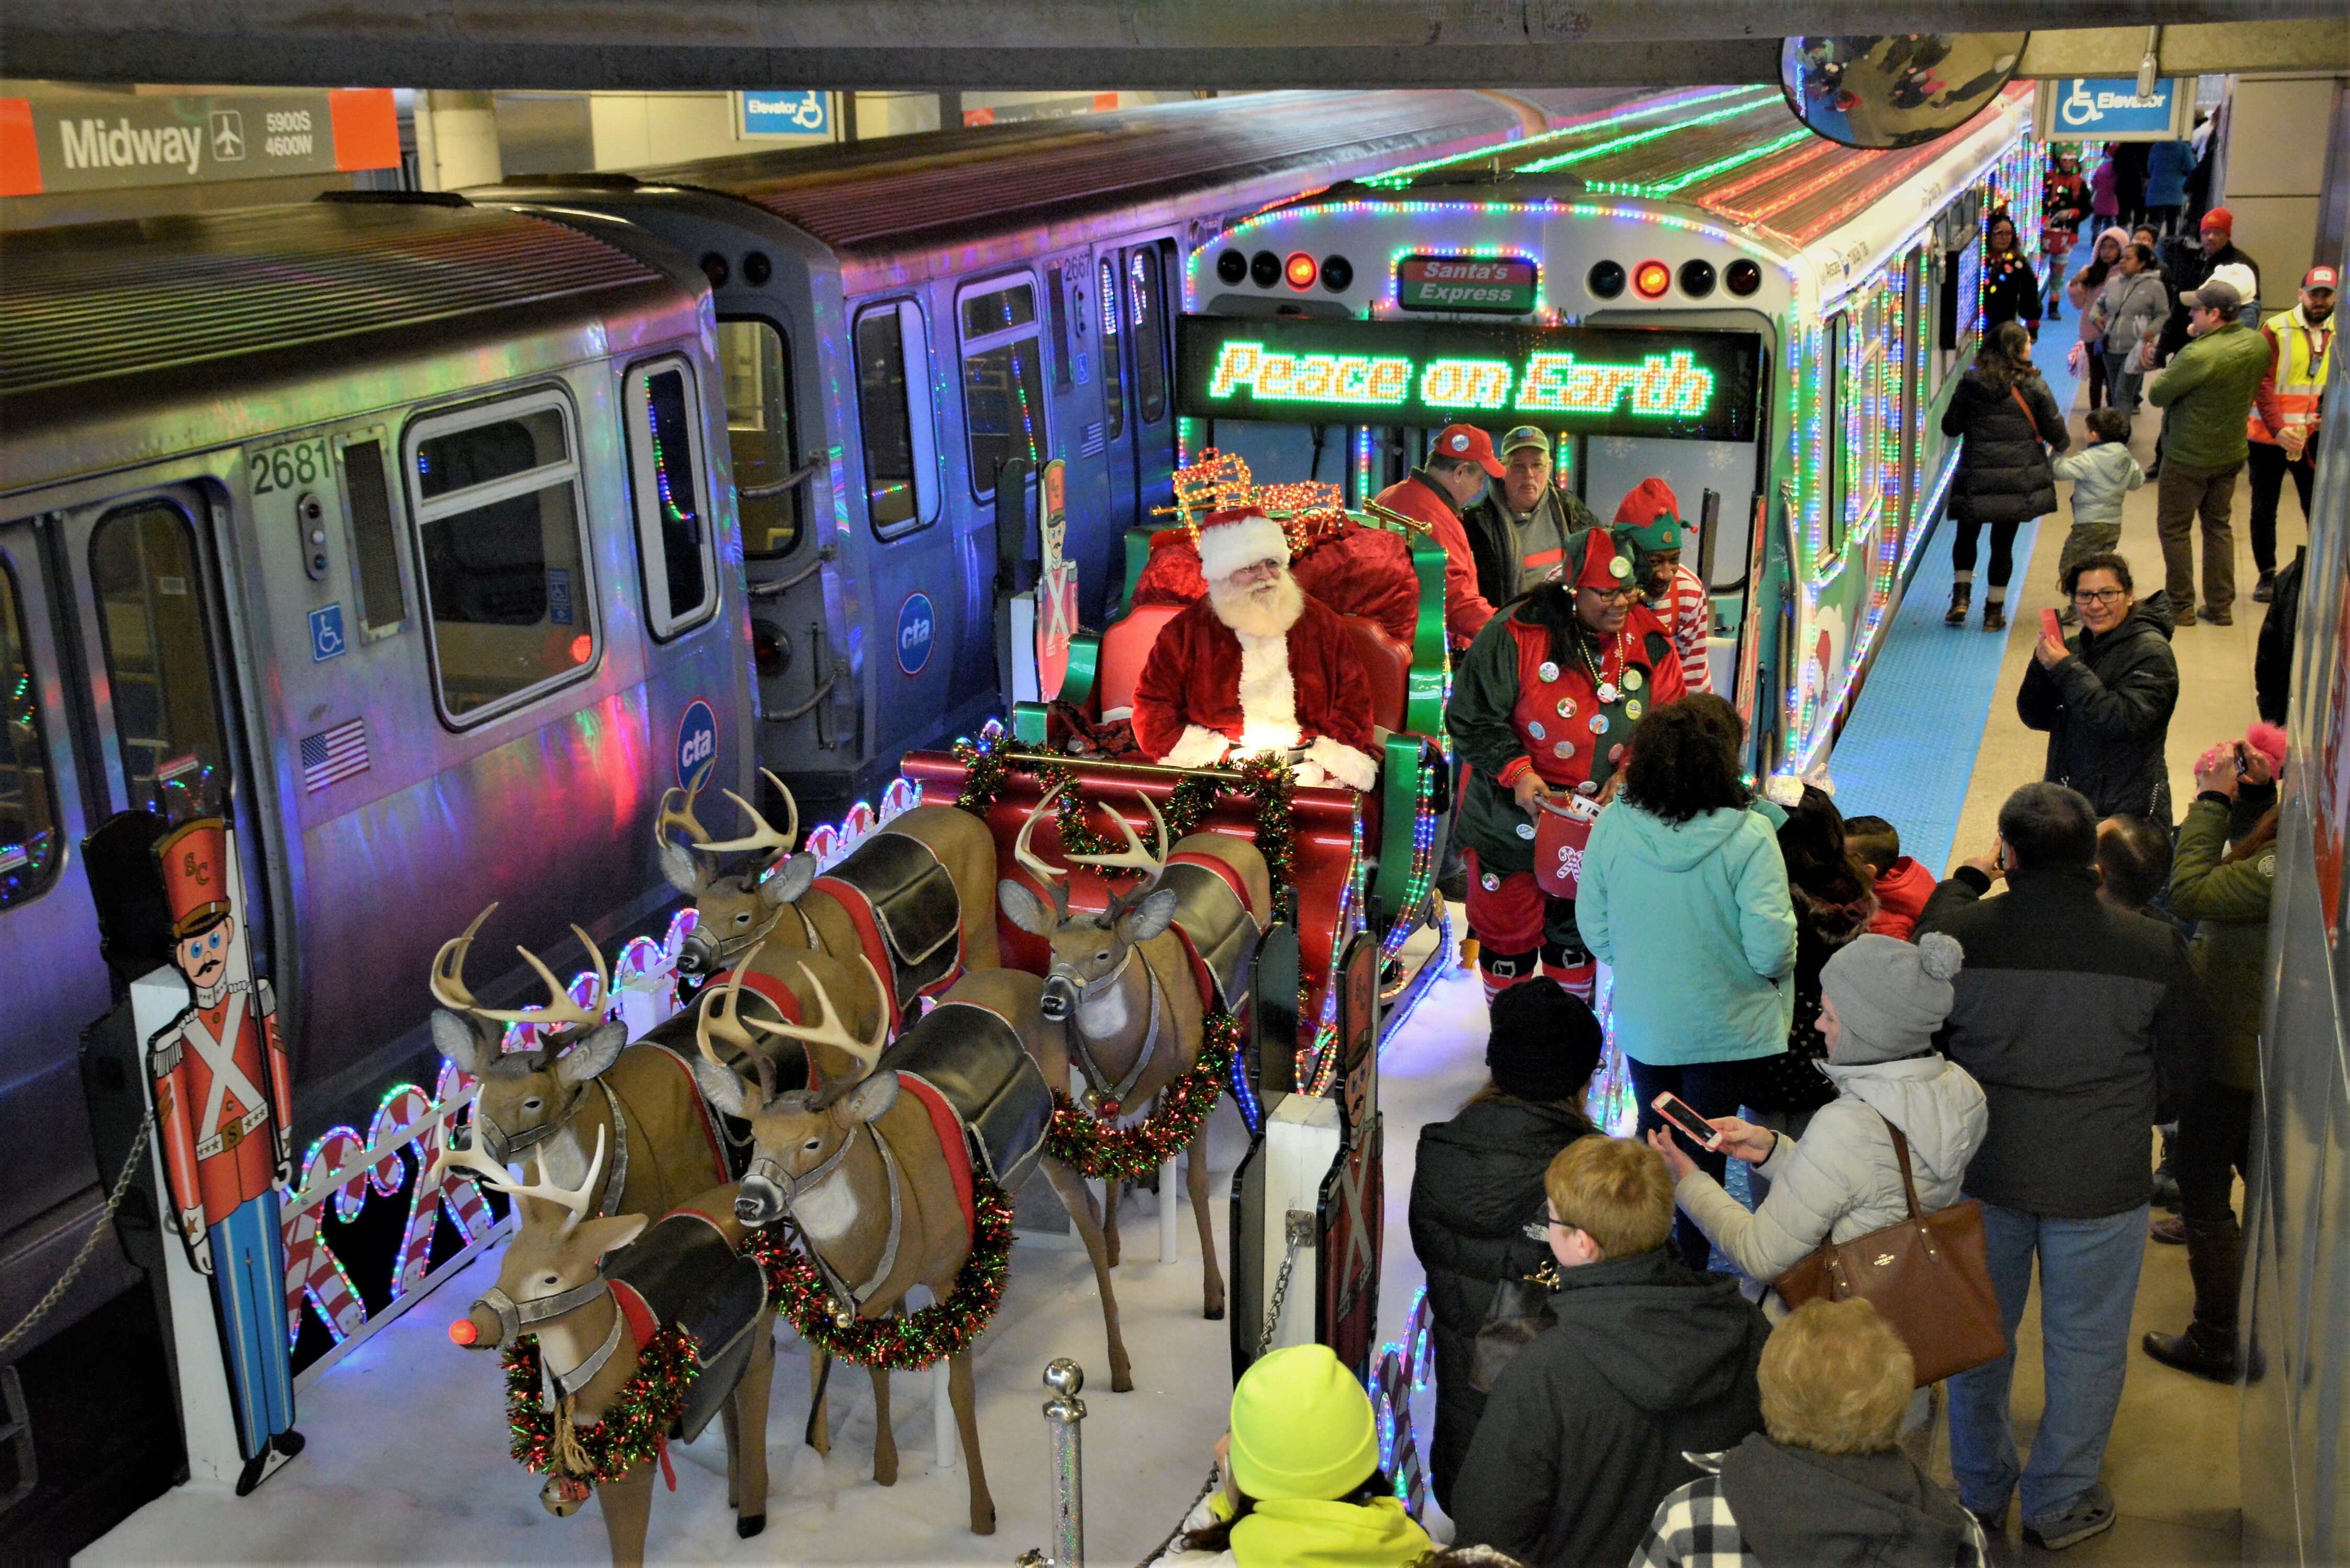 CTA’s Holiday Train and Bus Is Back For The Season. Here’s When and Where to Catch Ride – NBC Chicago